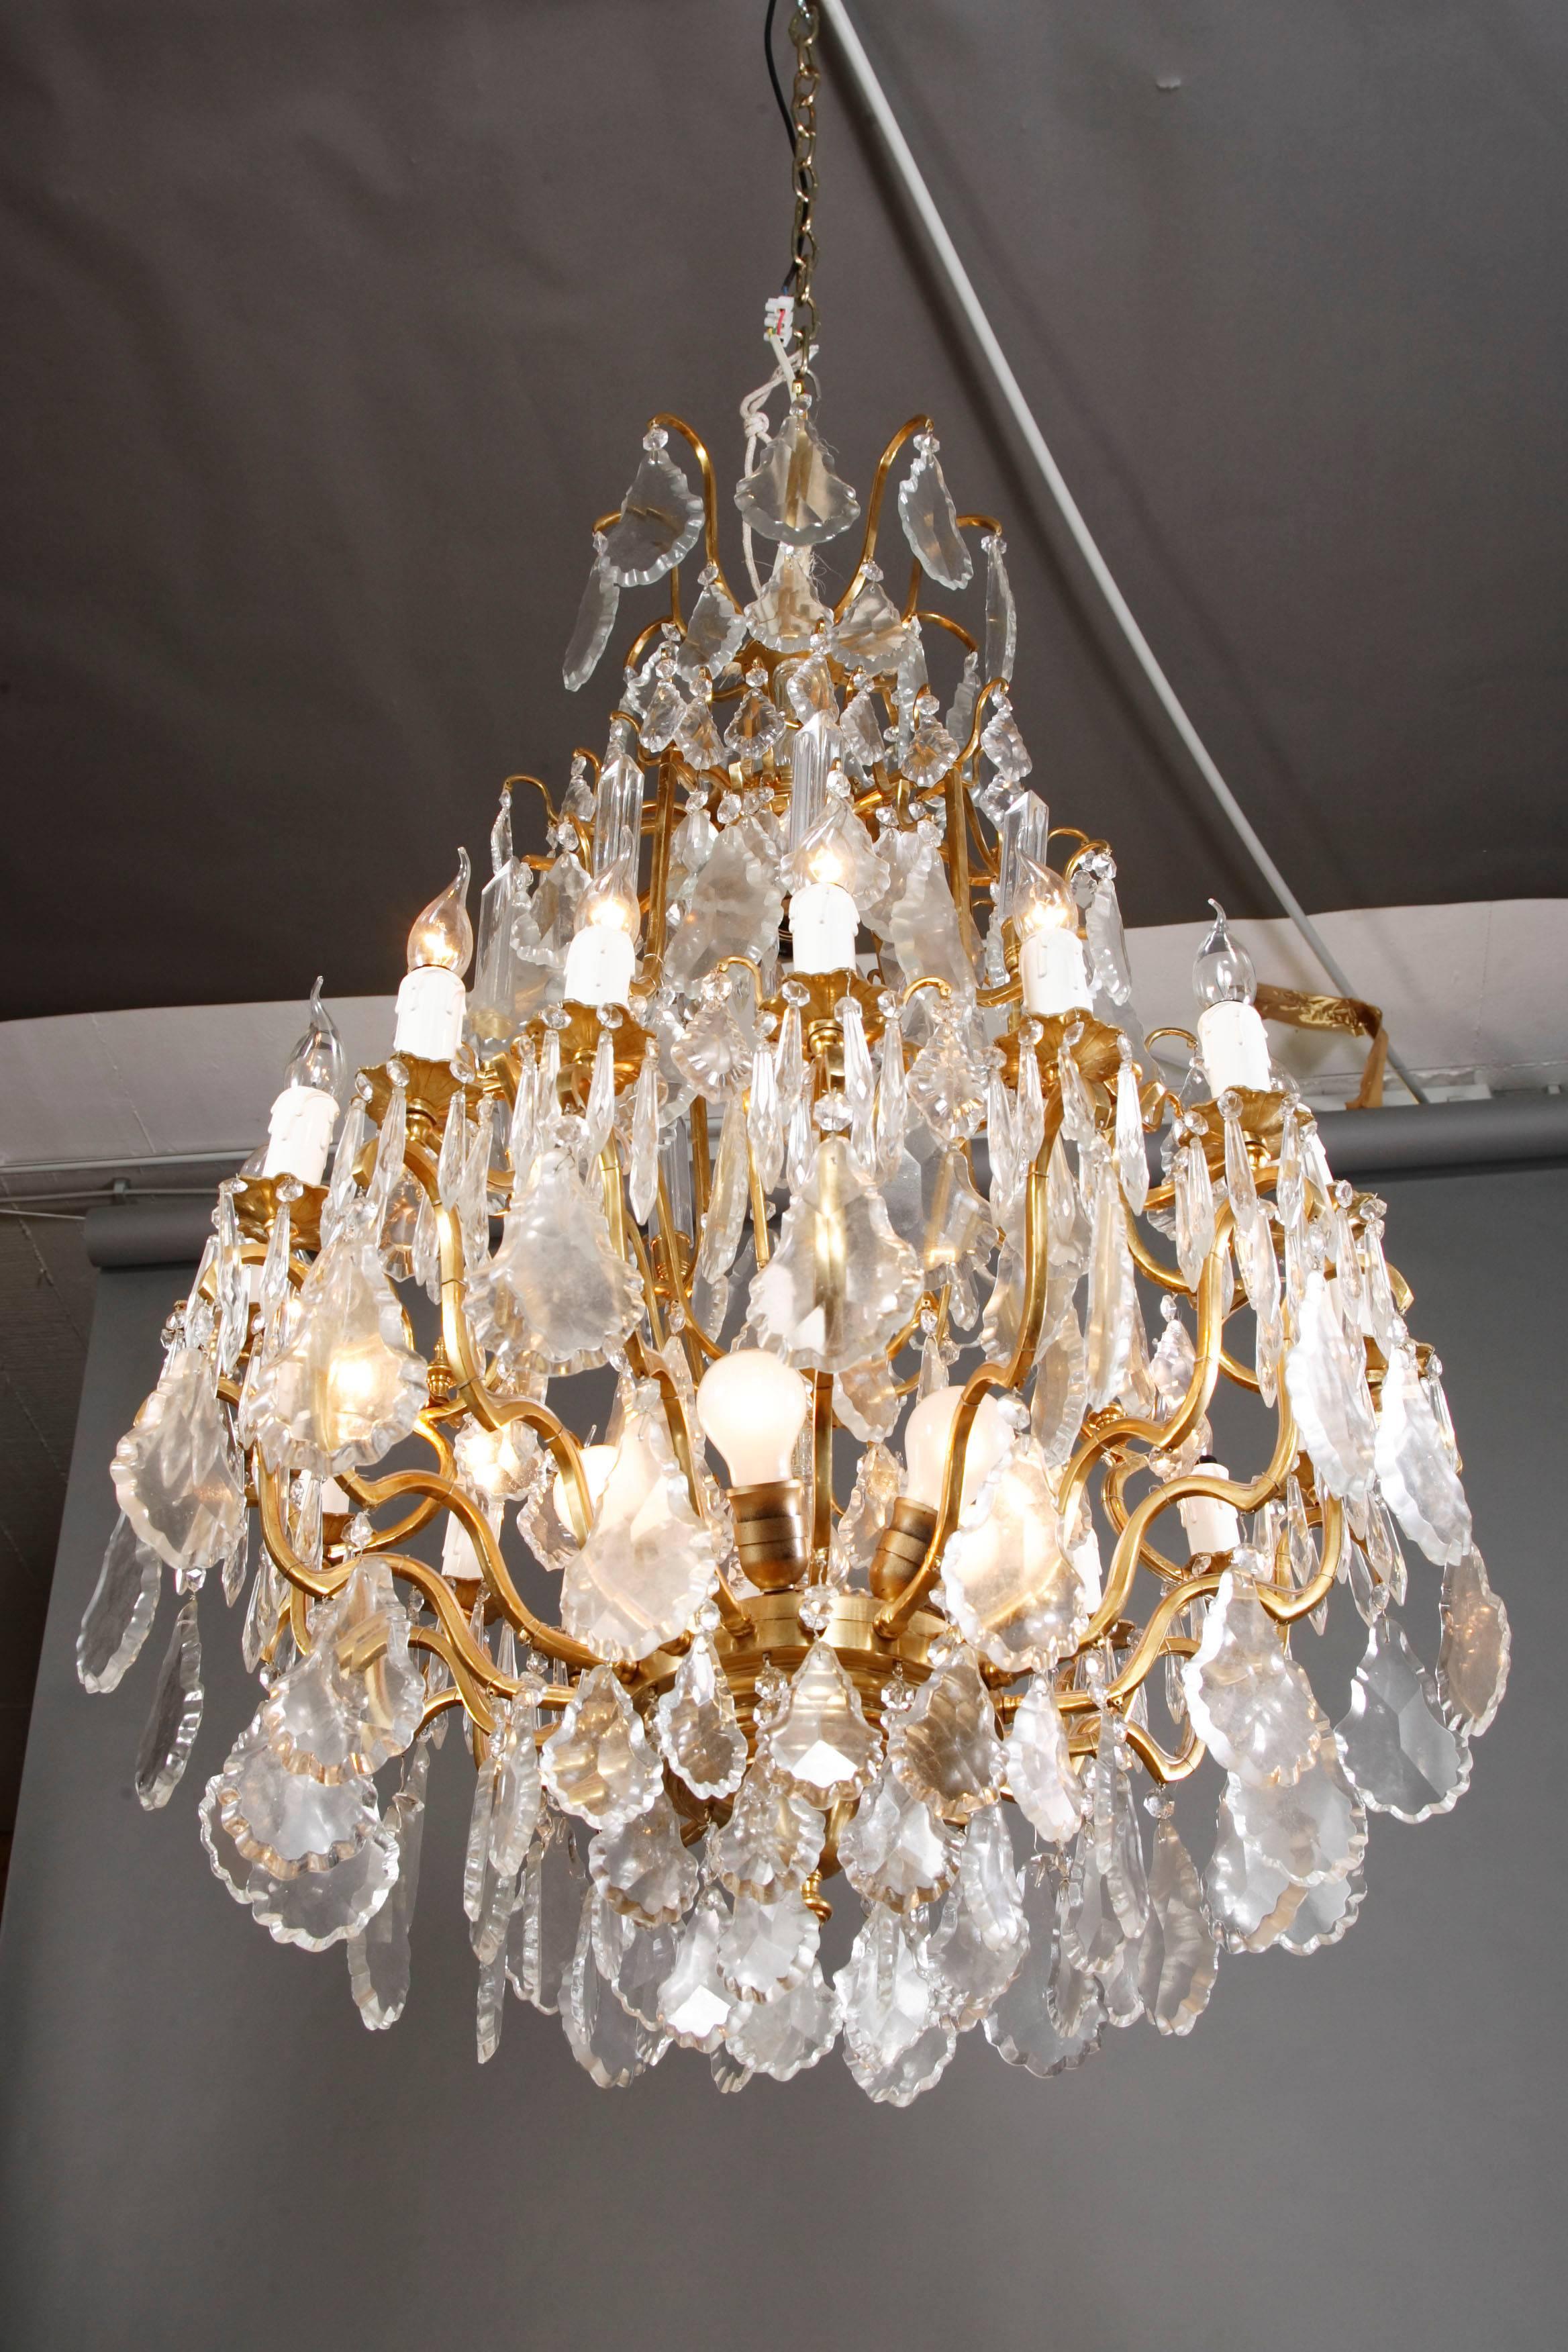 French prisms chandelier in Louis 15th style.
Polished brass. Finely ground crystal. Eighteen curved light arms.

(F-Hud-3).